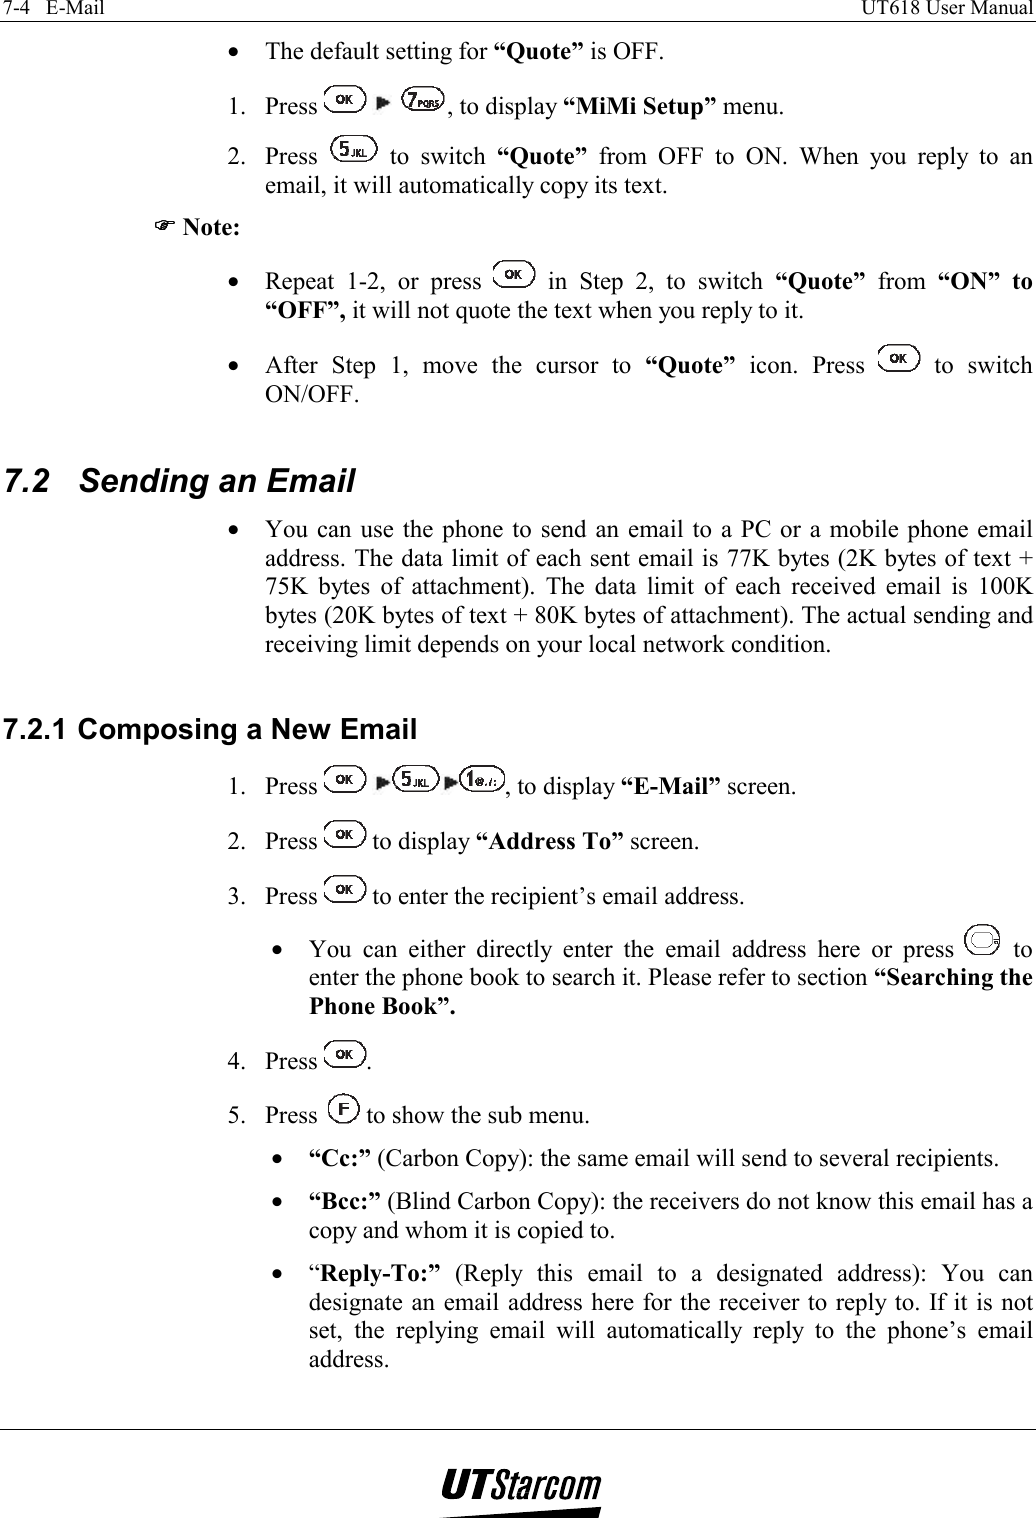 7-4   E-Mail    UT618 User Manual   •  The default setting for “Quote” is OFF. 1. Press      , to display “MiMi Setup” menu. 2. Press   to switch “Quote” from OFF to ON. When you reply to an email, it will automatically copy its text. )))) Note: •  Repeat 1-2, or press   in Step 2, to switch “Quote” from “ON” to “OFF”, it will not quote the text when you reply to it. •  After Step 1, move the cursor to “Quote” icon. Press   to switch ON/OFF.  7.2  Sending an Email •  You can use the phone to send an email to a PC or a mobile phone email address. The data limit of each sent email is 77K bytes (2K bytes of text + 75K bytes of attachment). The data limit of each received email is 100K bytes (20K bytes of text + 80K bytes of attachment). The actual sending and receiving limit depends on your local network condition.  7.2.1 Composing a New Email 1. Press   , to display “E-Mail” screen. 2. Press   to display “Address To” screen. 3. Press   to enter the recipient’s email address. •  You can either directly enter the email address here or press   to enter the phone book to search it. Please refer to section “Searching the Phone Book”. 4. Press  . 5. Press   to show the sub menu. •  “Cc:” (Carbon Copy): the same email will send to several recipients. •  “Bcc:” (Blind Carbon Copy): the receivers do not know this email has a copy and whom it is copied to. •  “Reply-To:” (Reply this email to a designated address): You can designate an email address here for the receiver to reply to. If it is not set, the replying email will automatically reply to the phone’s email address. 